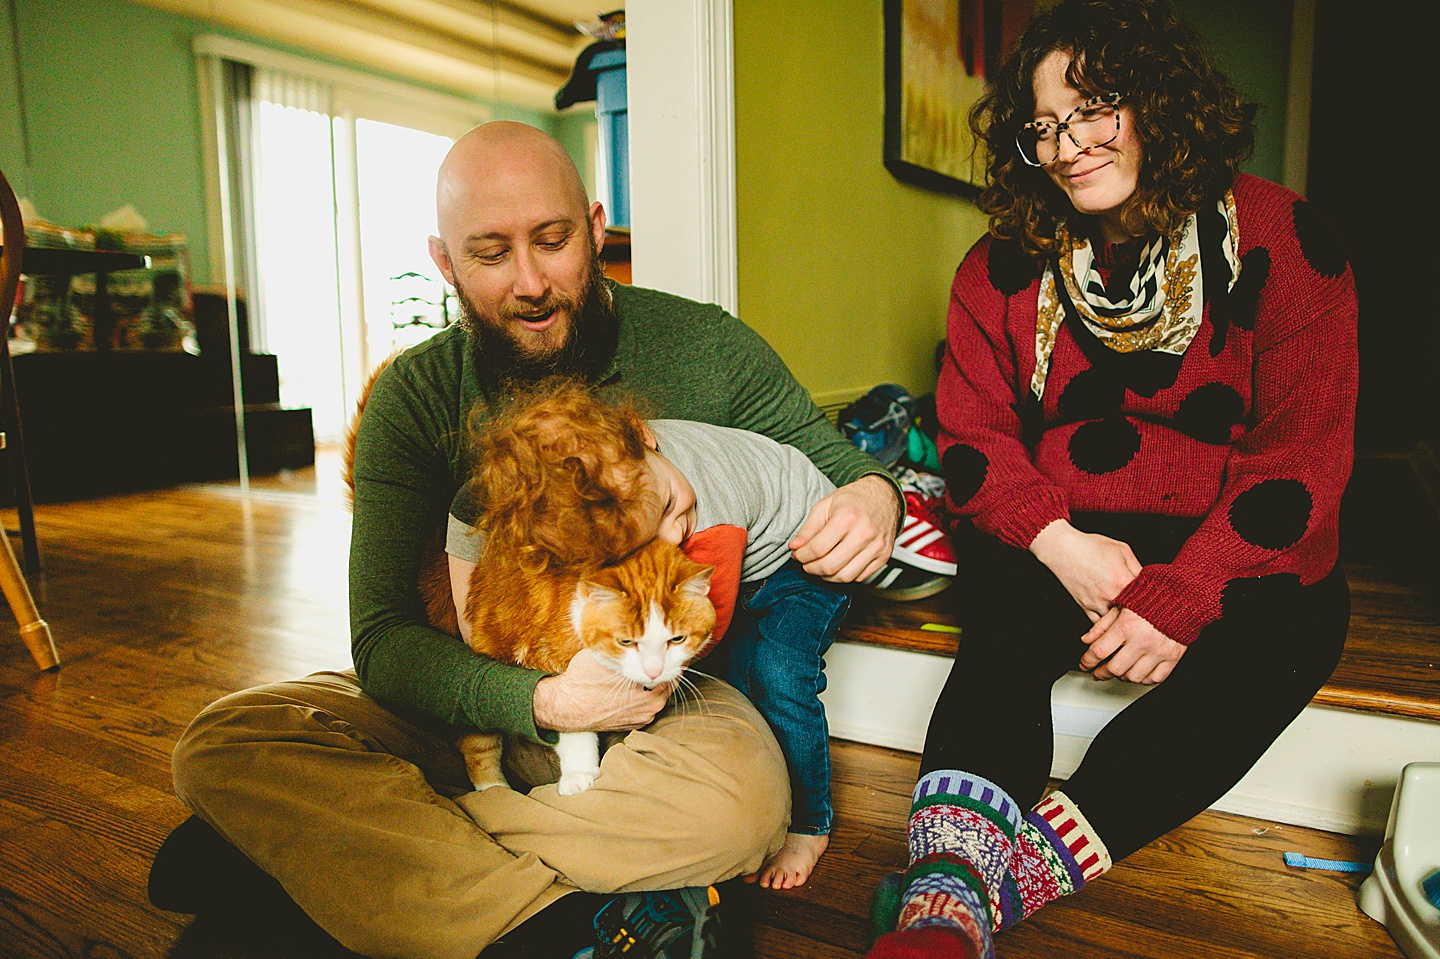 Family portrait with cat in home where boy is hugging cat